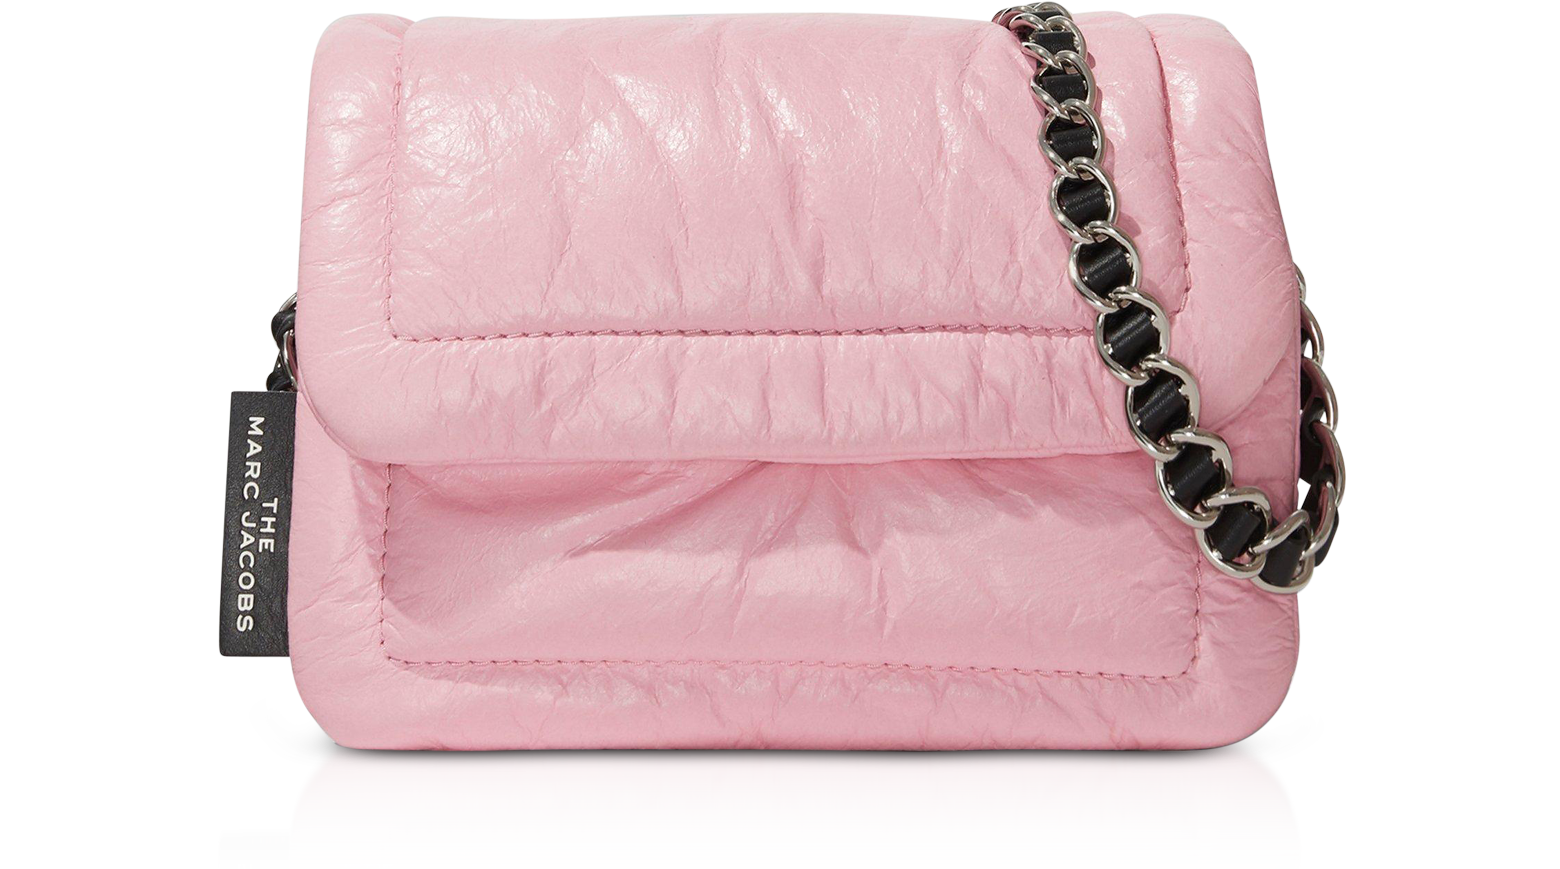 Marc Jacobs The Mini Pillow Powder Pink Leather Crossbody Bag at FORZIERI